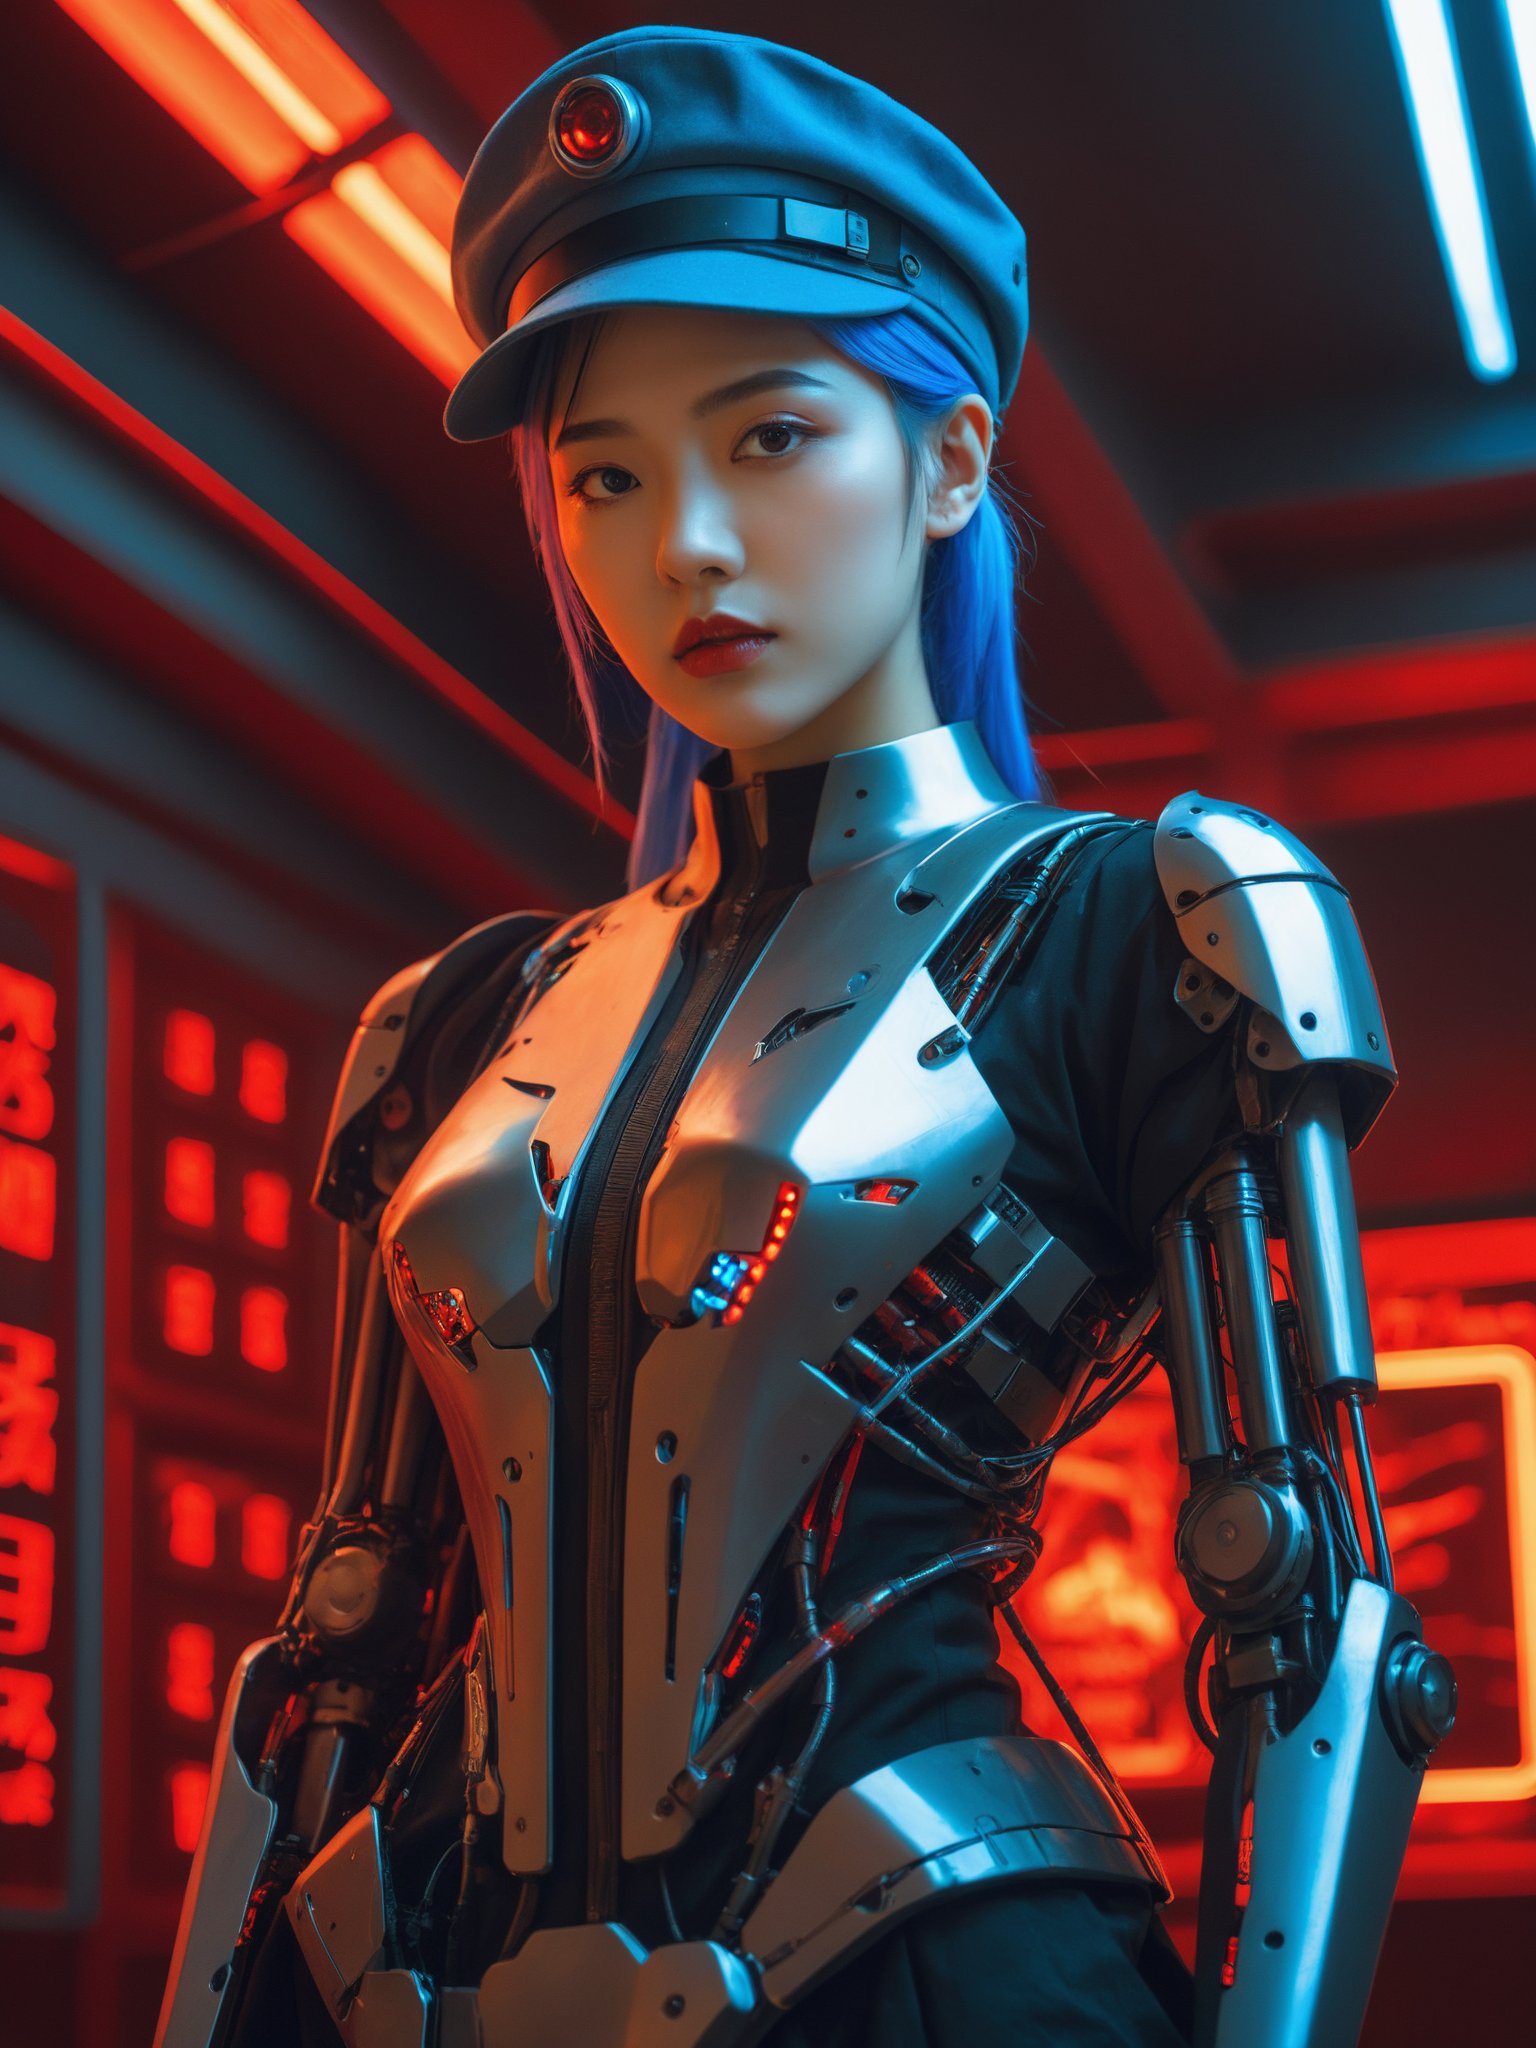 Realistic,Masterpiece,18 - year - old, solo, looking_at_viewer, simple_background, black_hair, upper_body, red_background, science_fiction, android, cable, straight-on, cyborg, robot_joints, cyberpunk, mechanical_parts, a woman with blue hair and a hat with a red light, Augmented detective's lair, holographic crime scene recreations hover above vintage noir-style furniture, creating an intriguing juxtaposition.,32k UHD,chinese girls,full_body,dynamic angle,